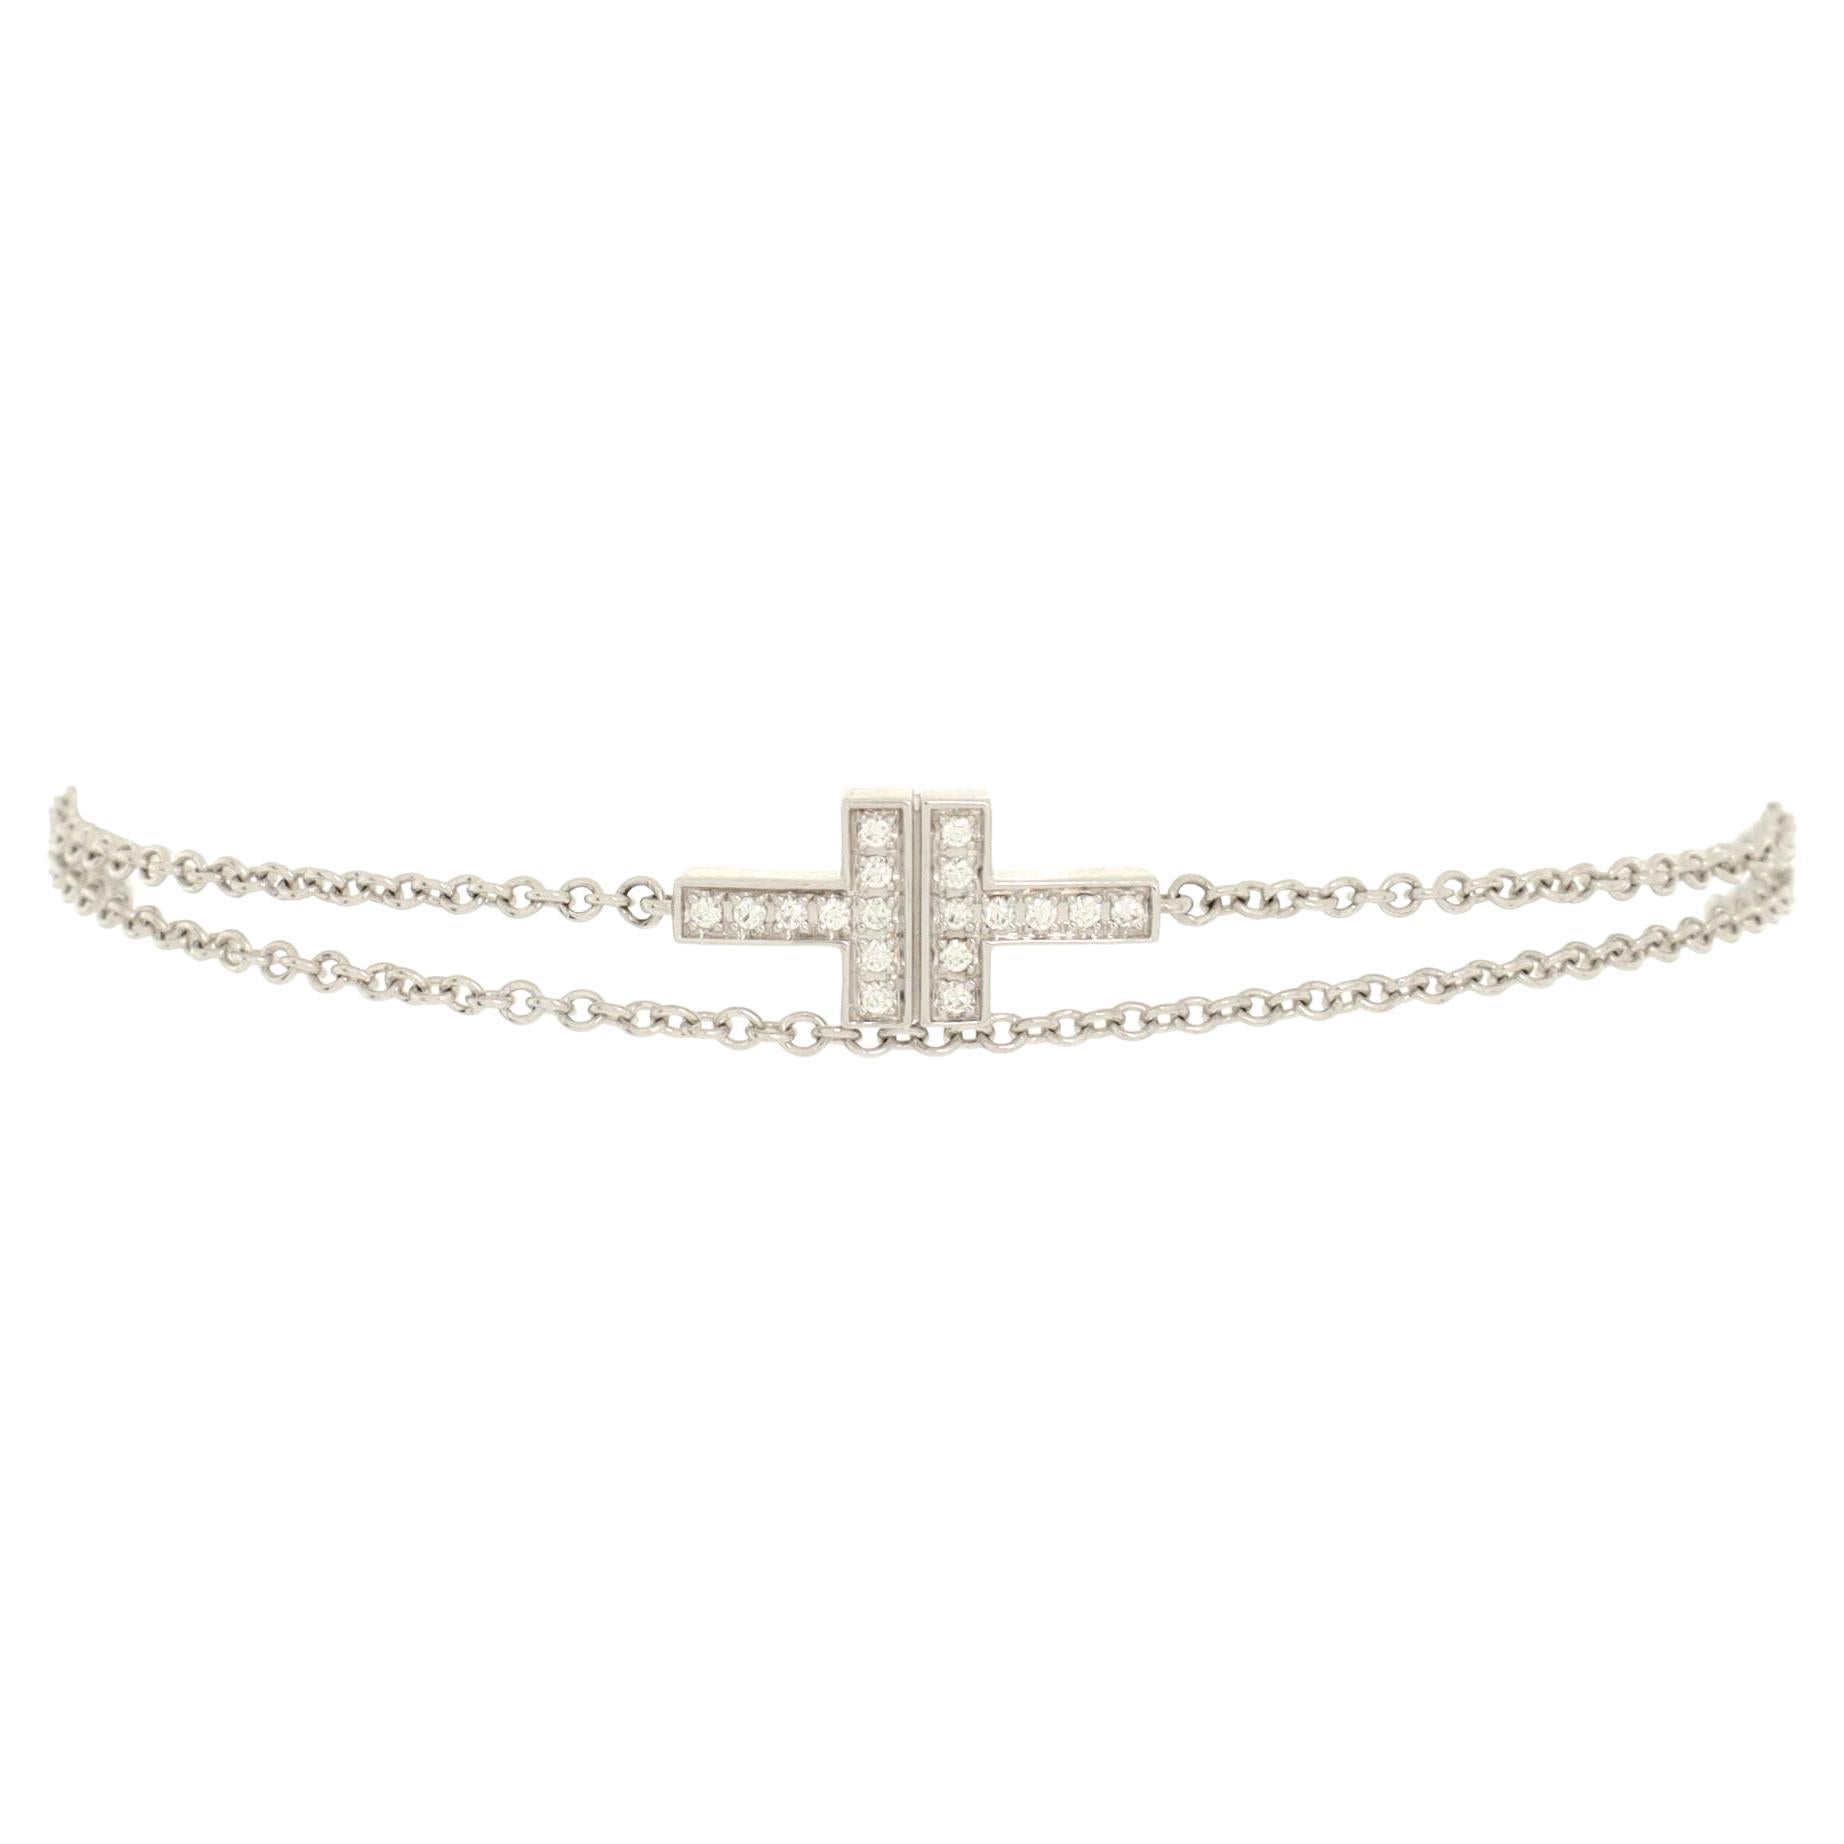 Tiffany & Co. T Double Chain Bracelet 18K White Gold and Diamonds Small